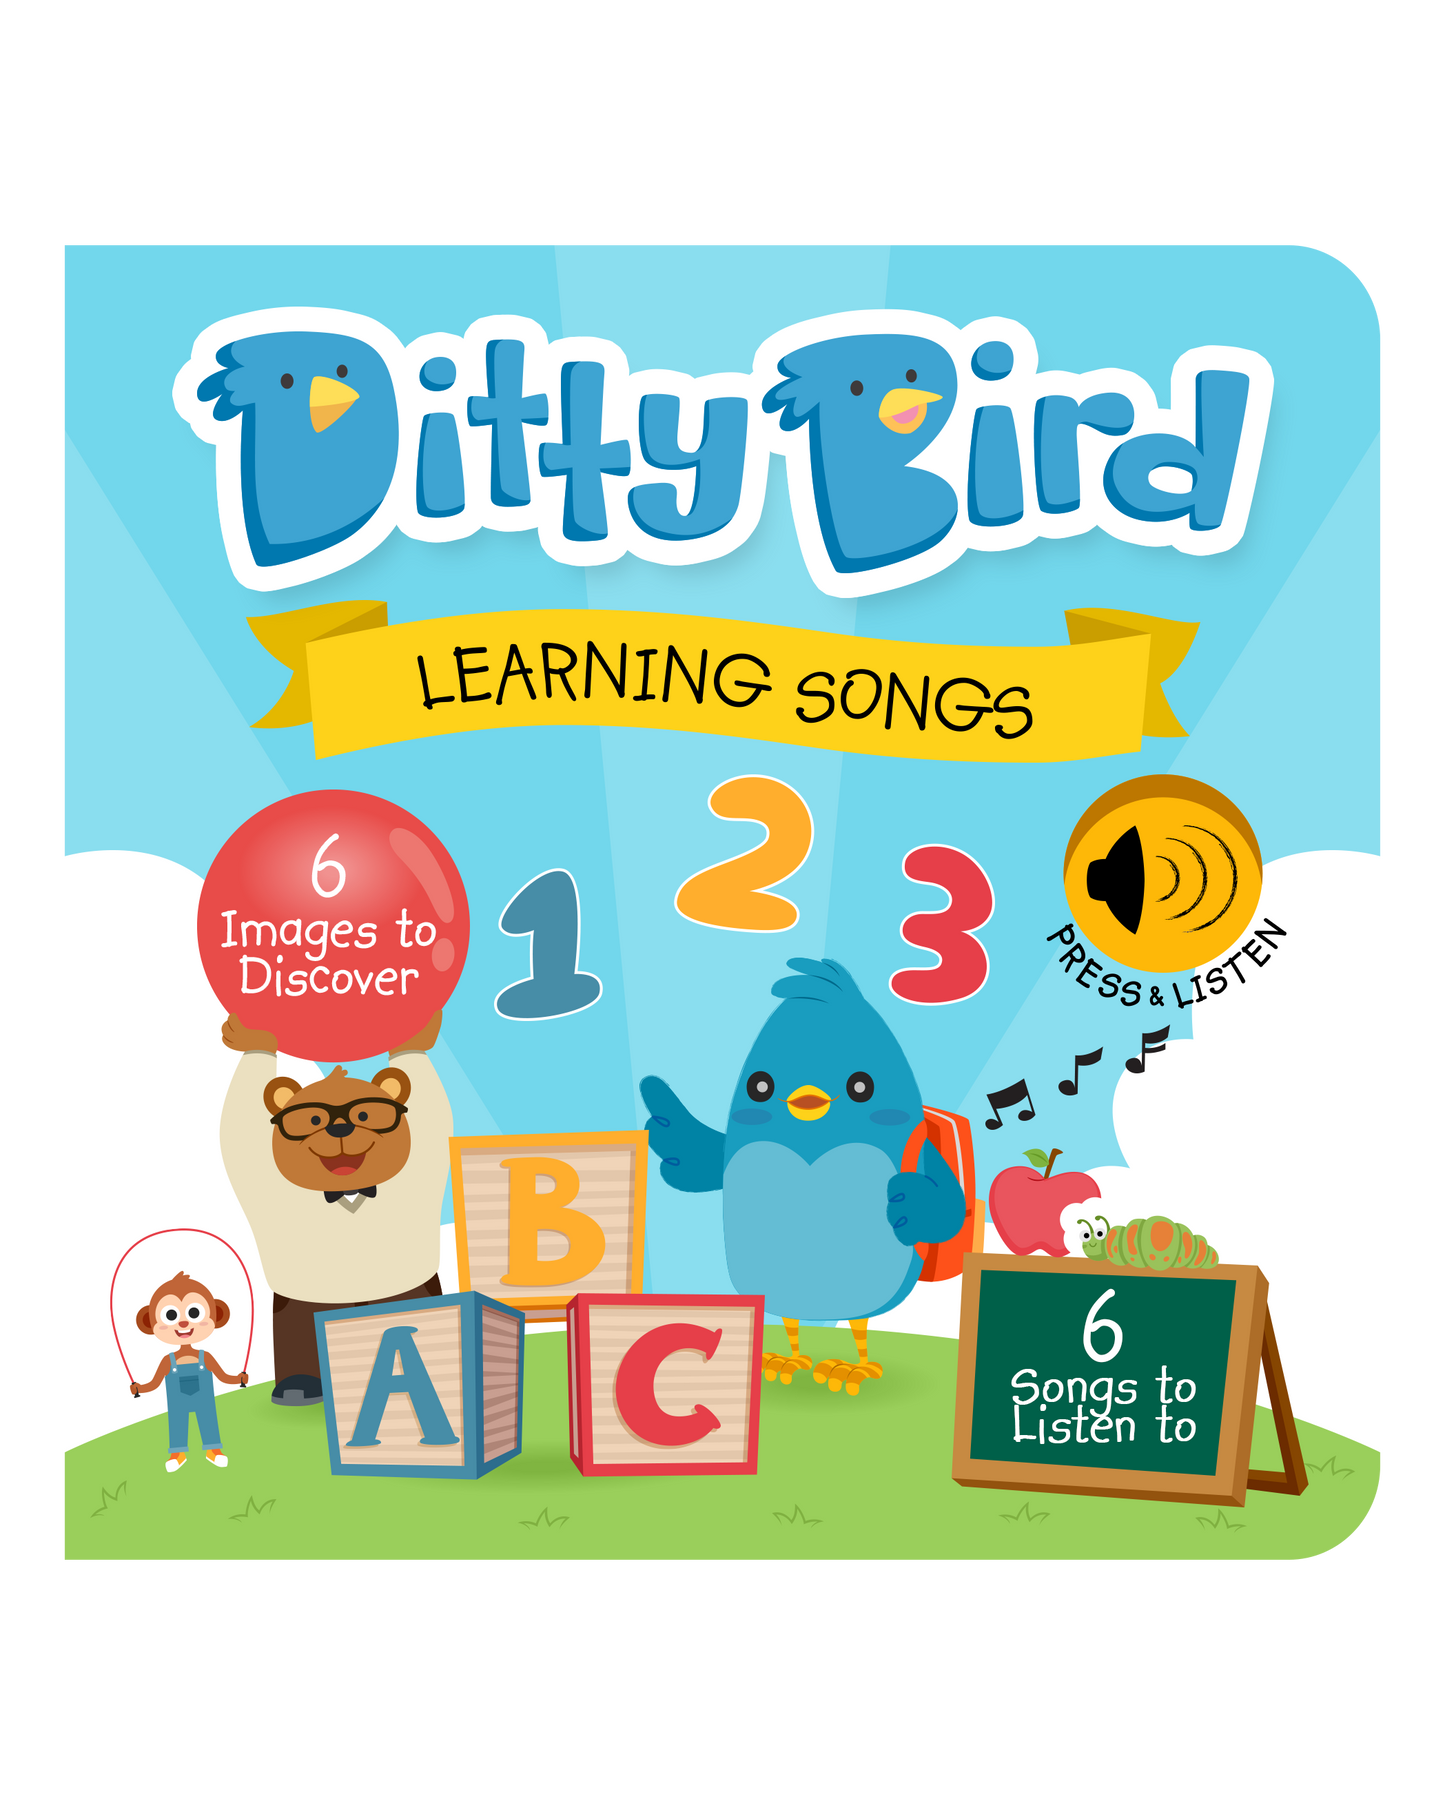 Ditty Bird Baby Sound Book Learning Songs